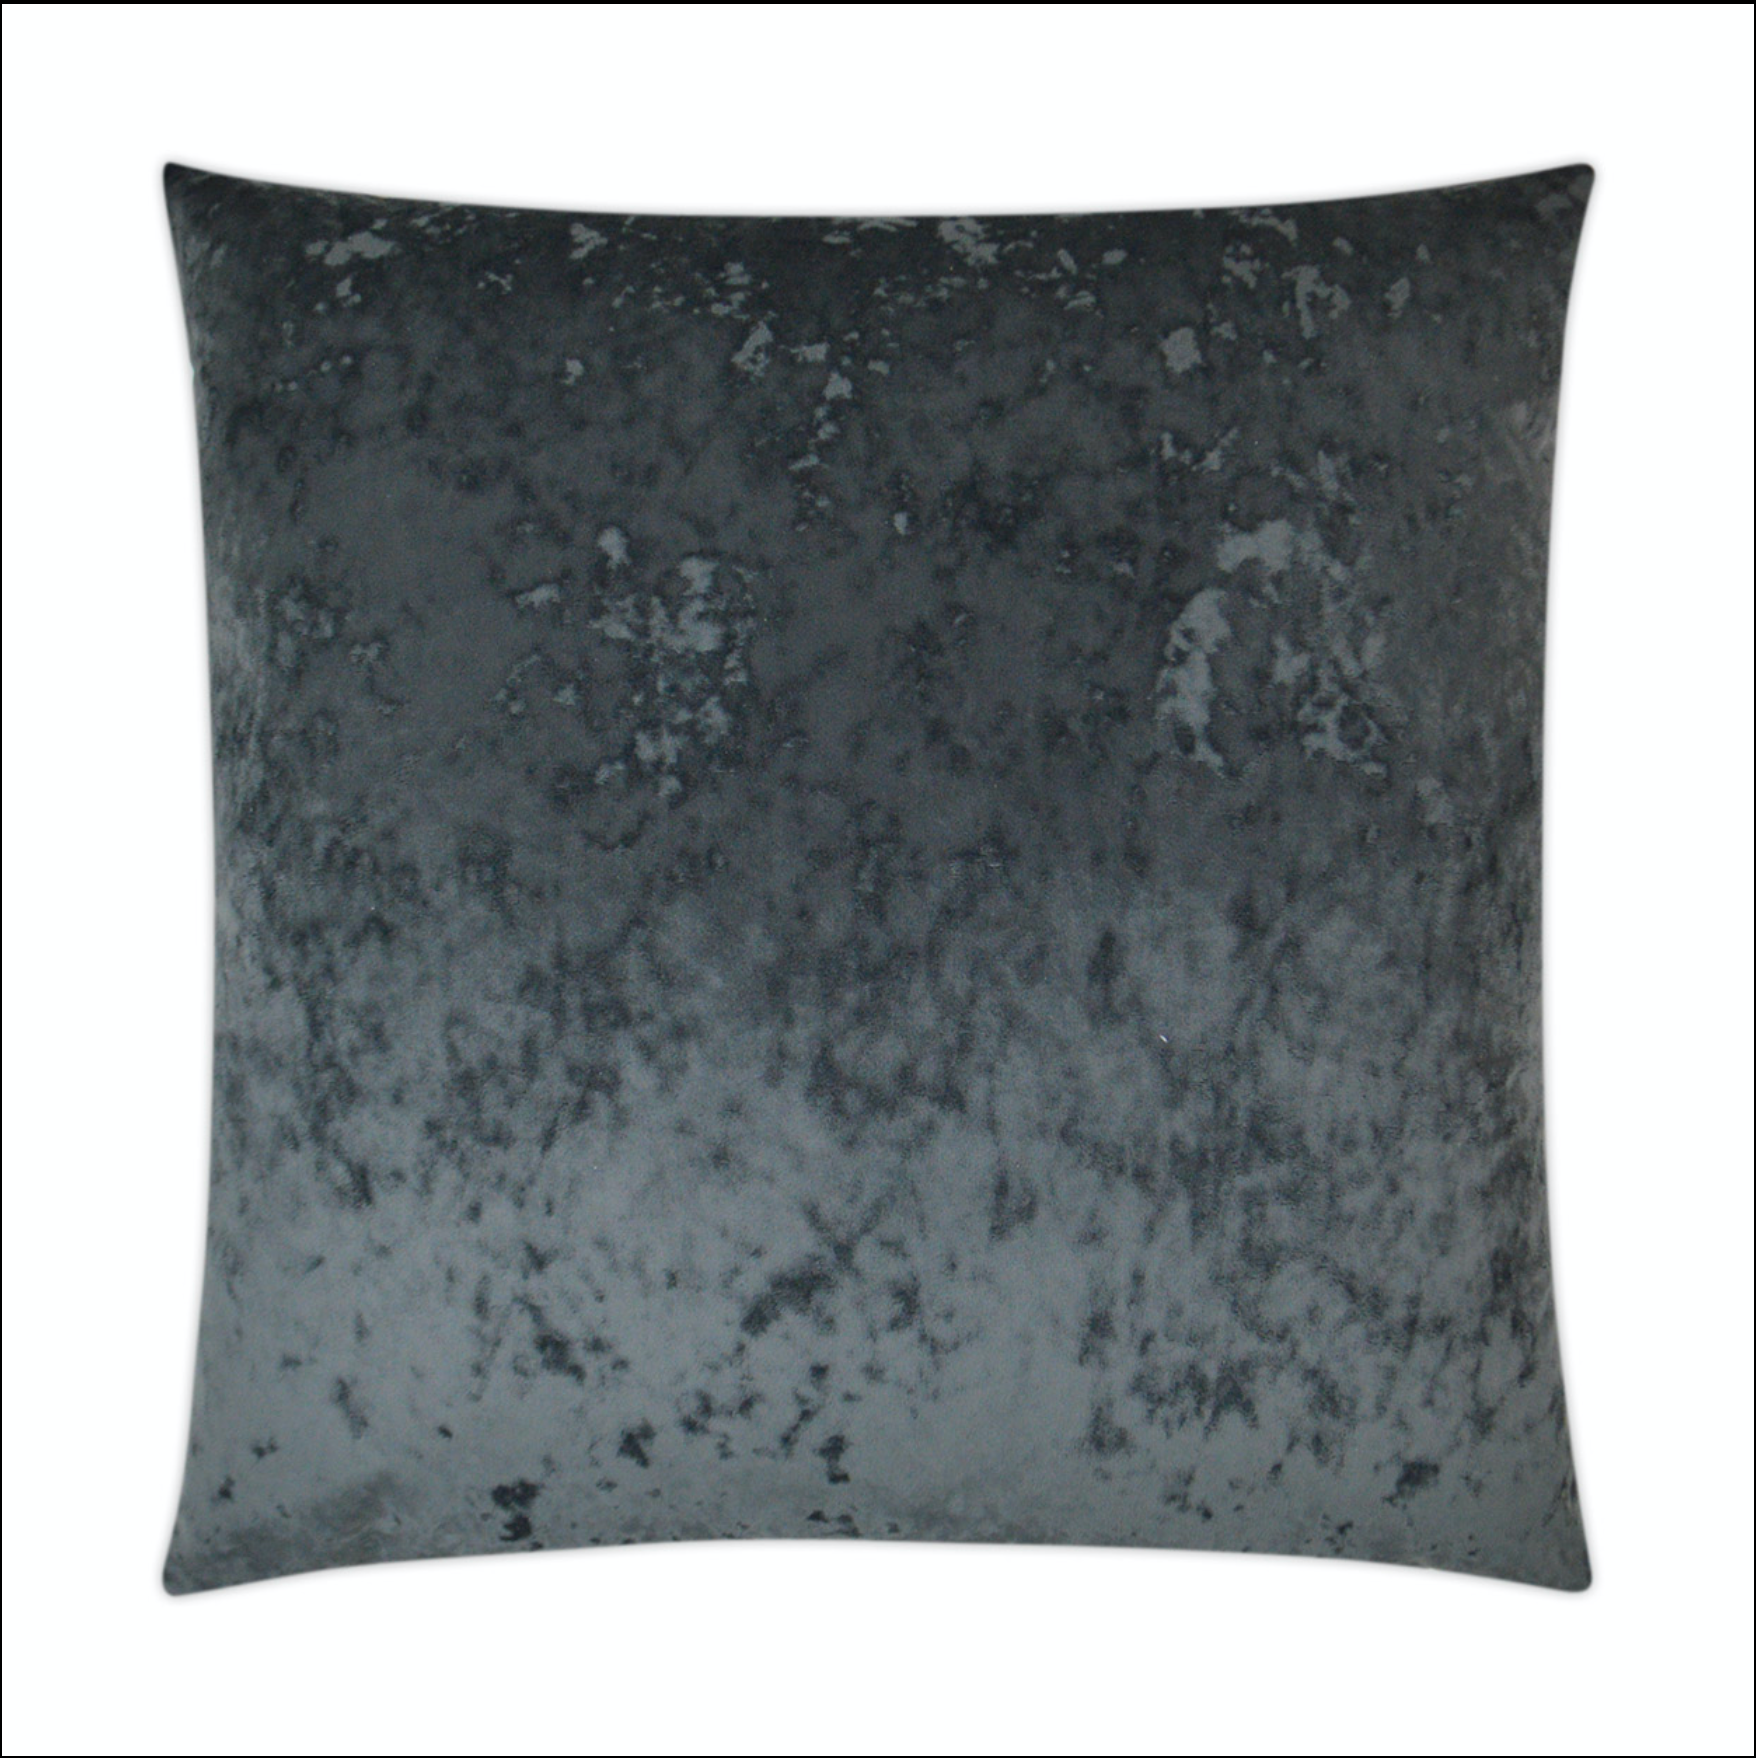 A La Mode Charcoal Throw Pillow - RSVP Style